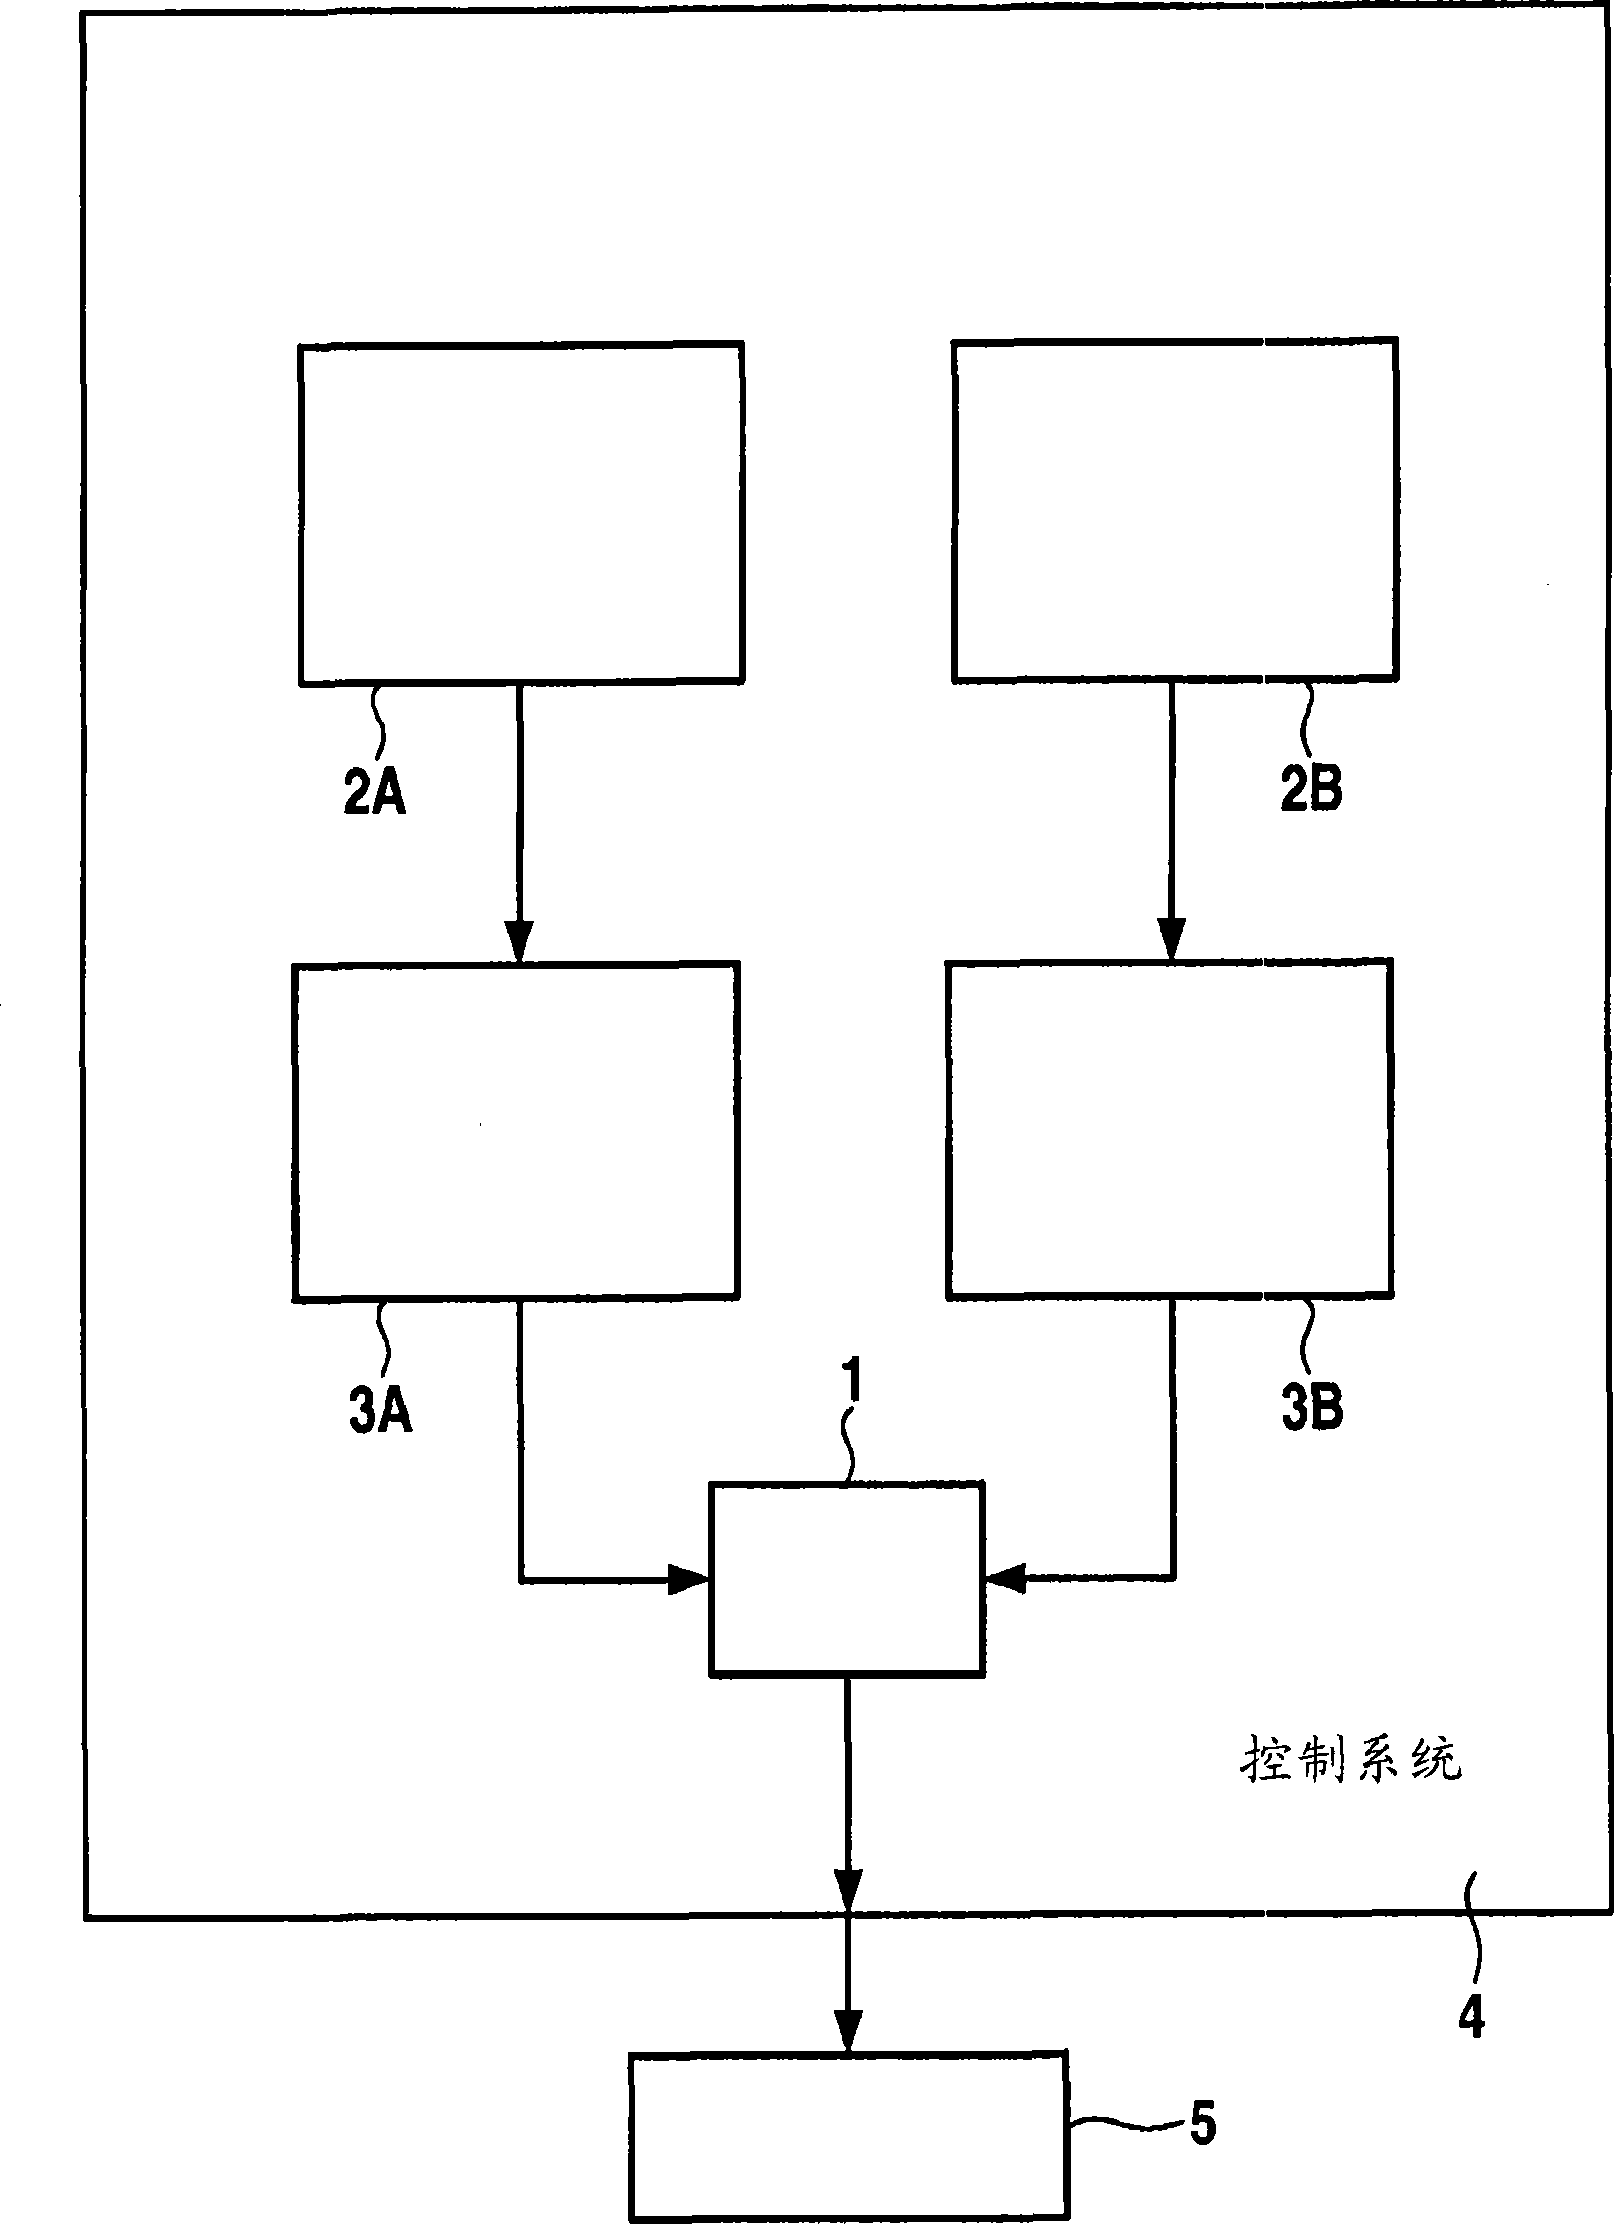 Method and device for monitoring a functionality of an engine controller of an internal combustion engine